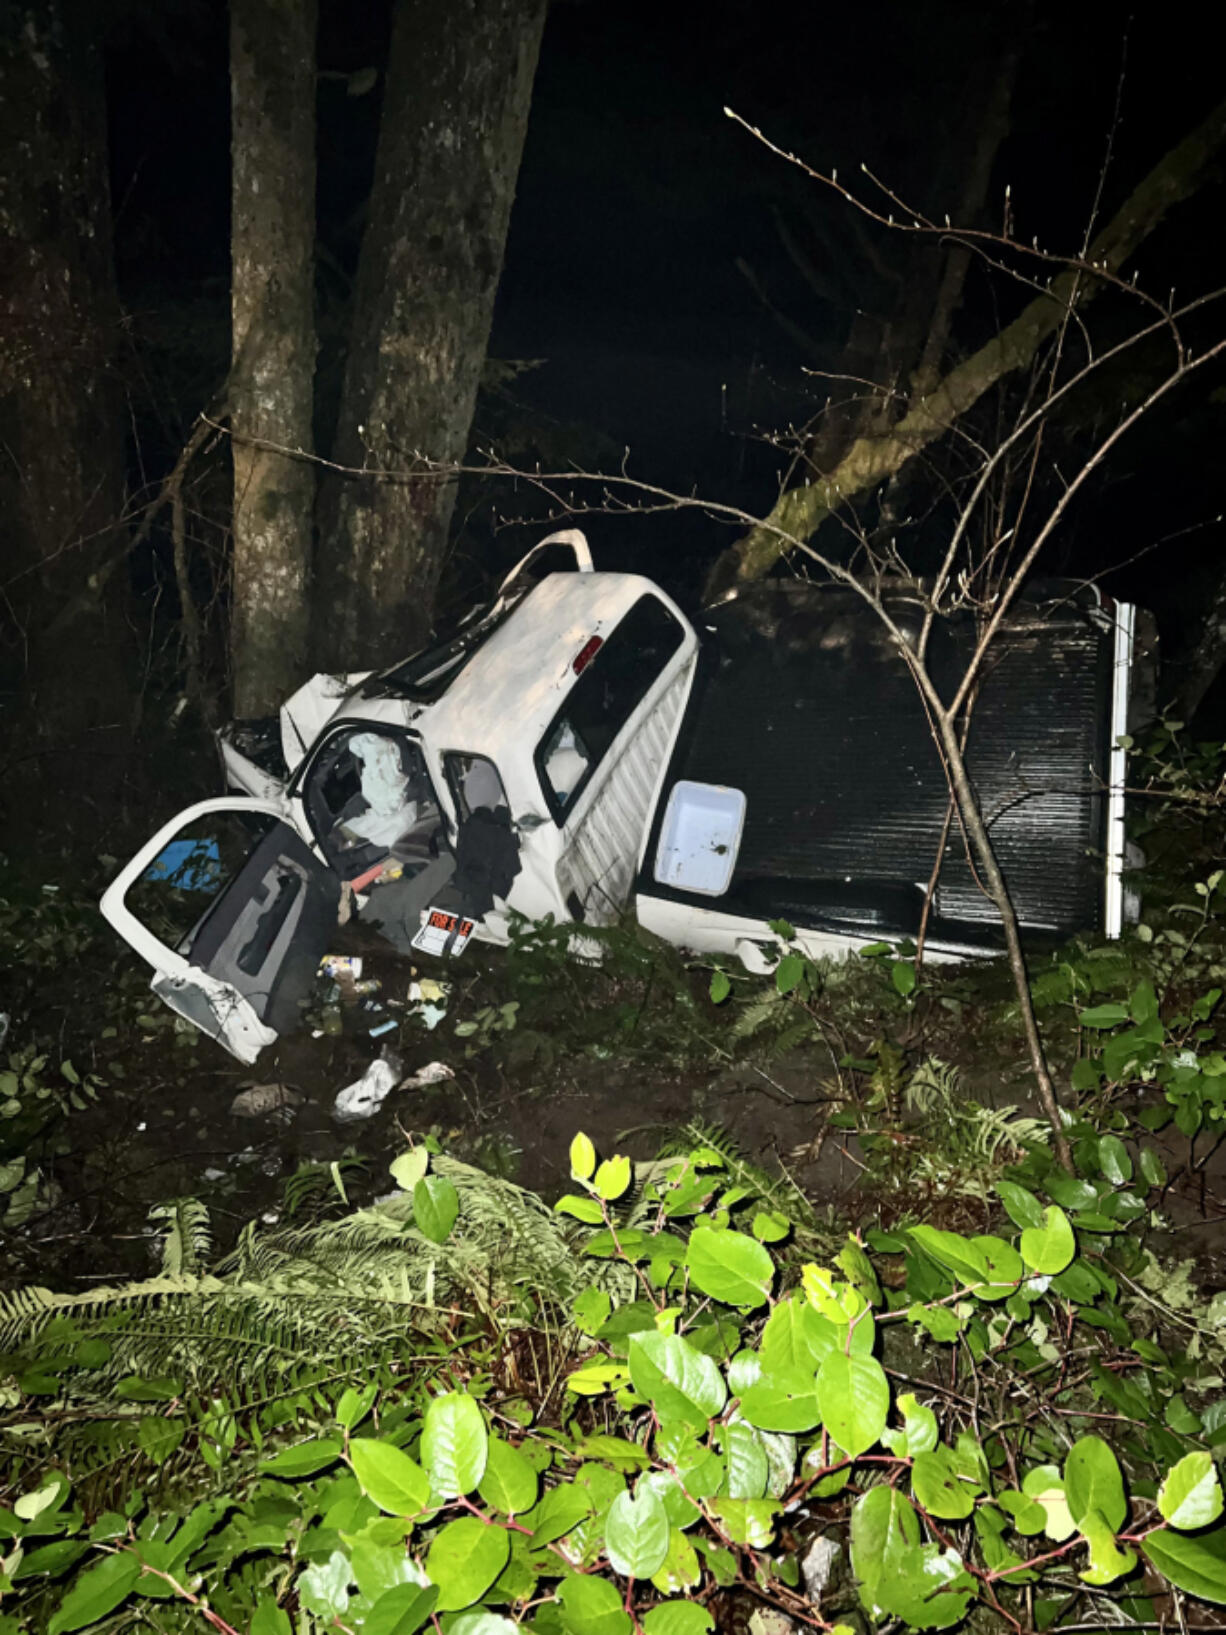 A crash Friday night on Northeast Lucia Falls Road in Yacolt took the life of Steven Woolsey. The truck in which he was a passenger went off the road, crashing into several trees.